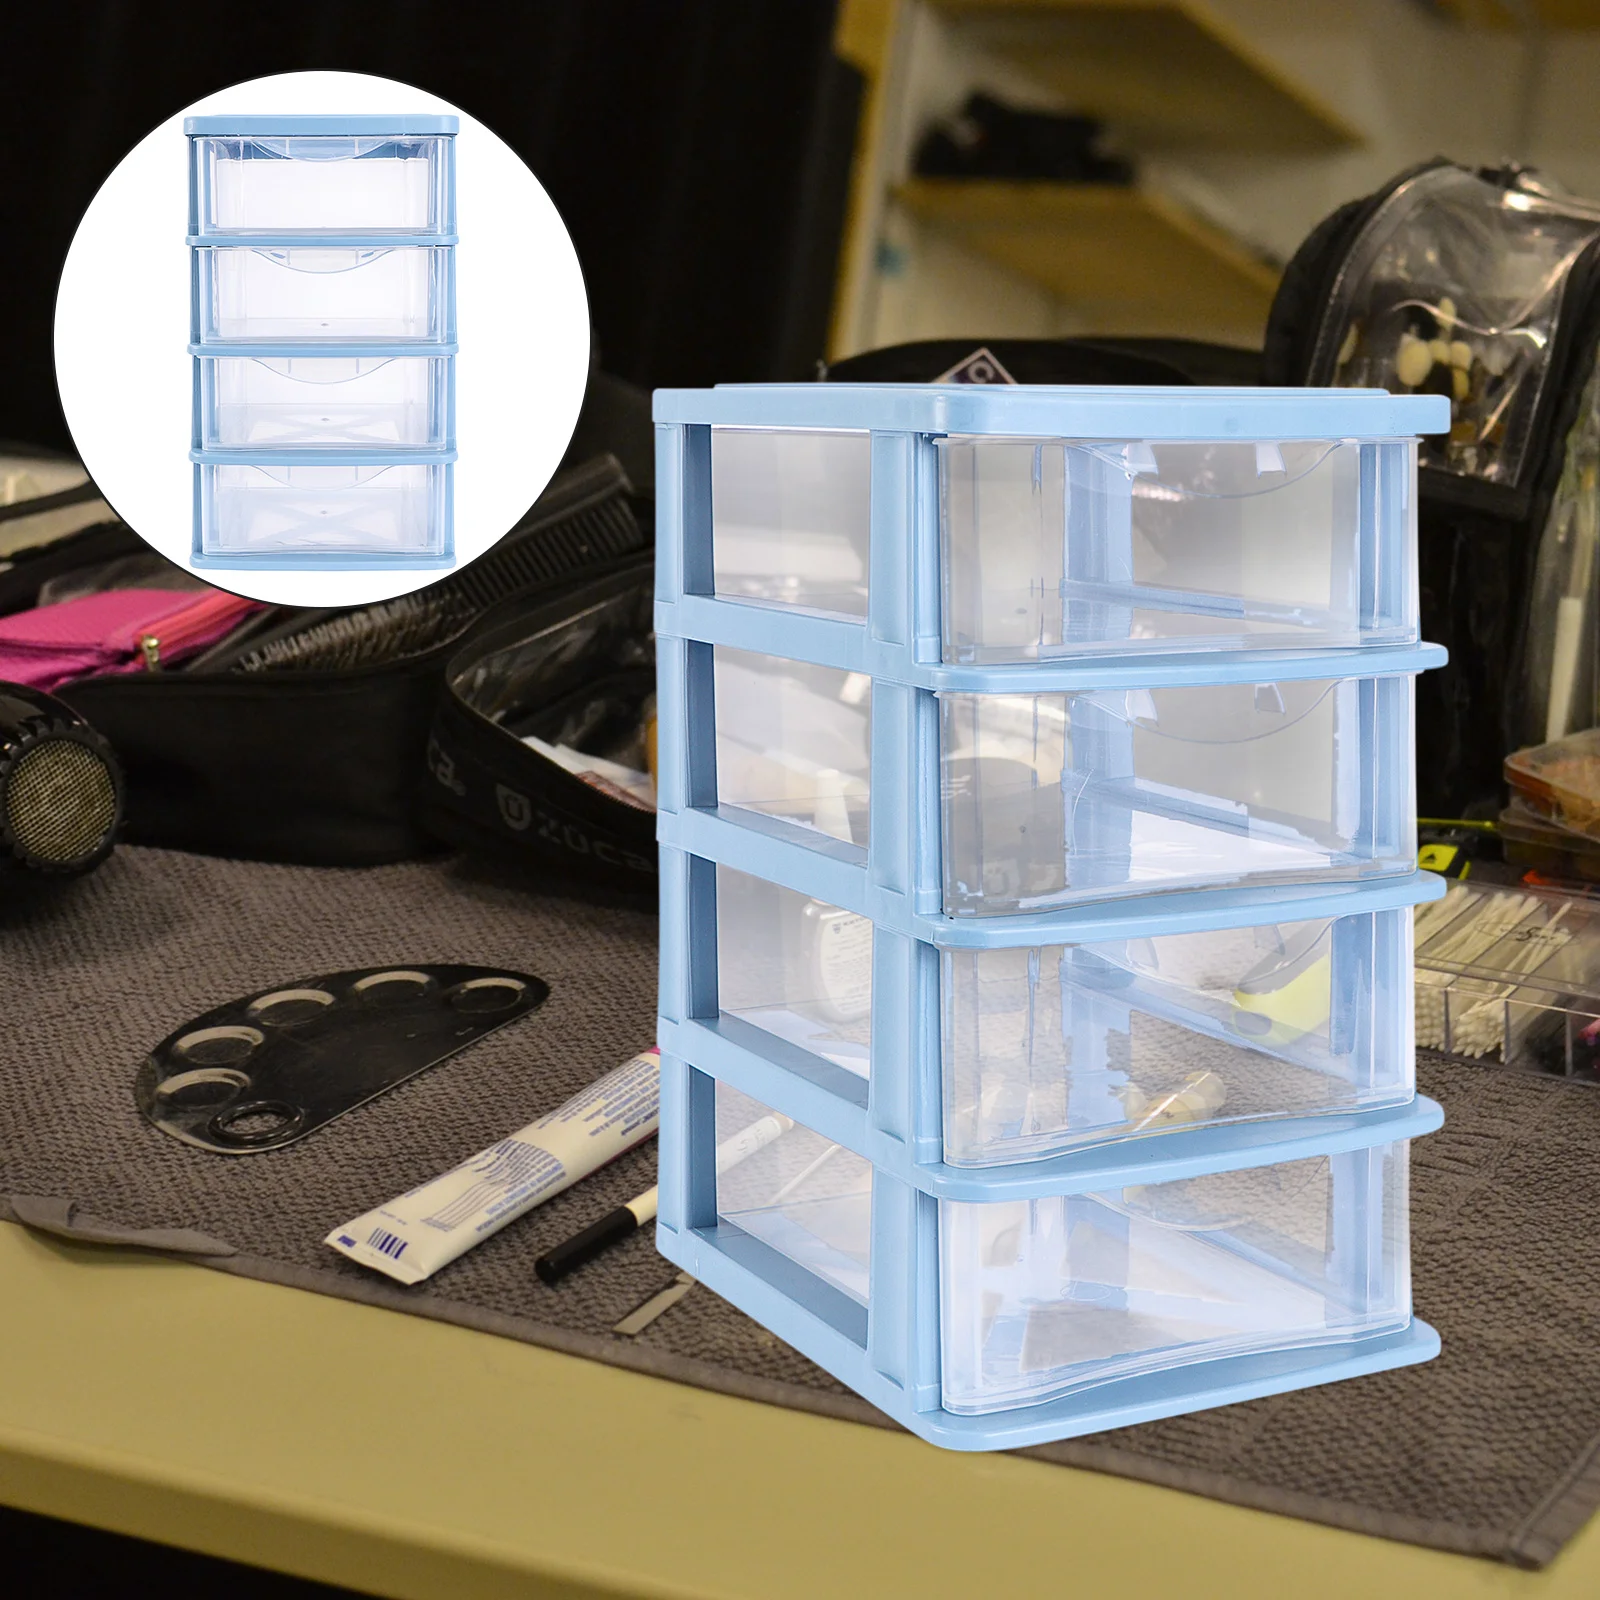 

Storage Drawer Organizer Drawers Desktopboxcabinet Makeup Office Small Desk Unit Casesundries Holder Containers Container Clear